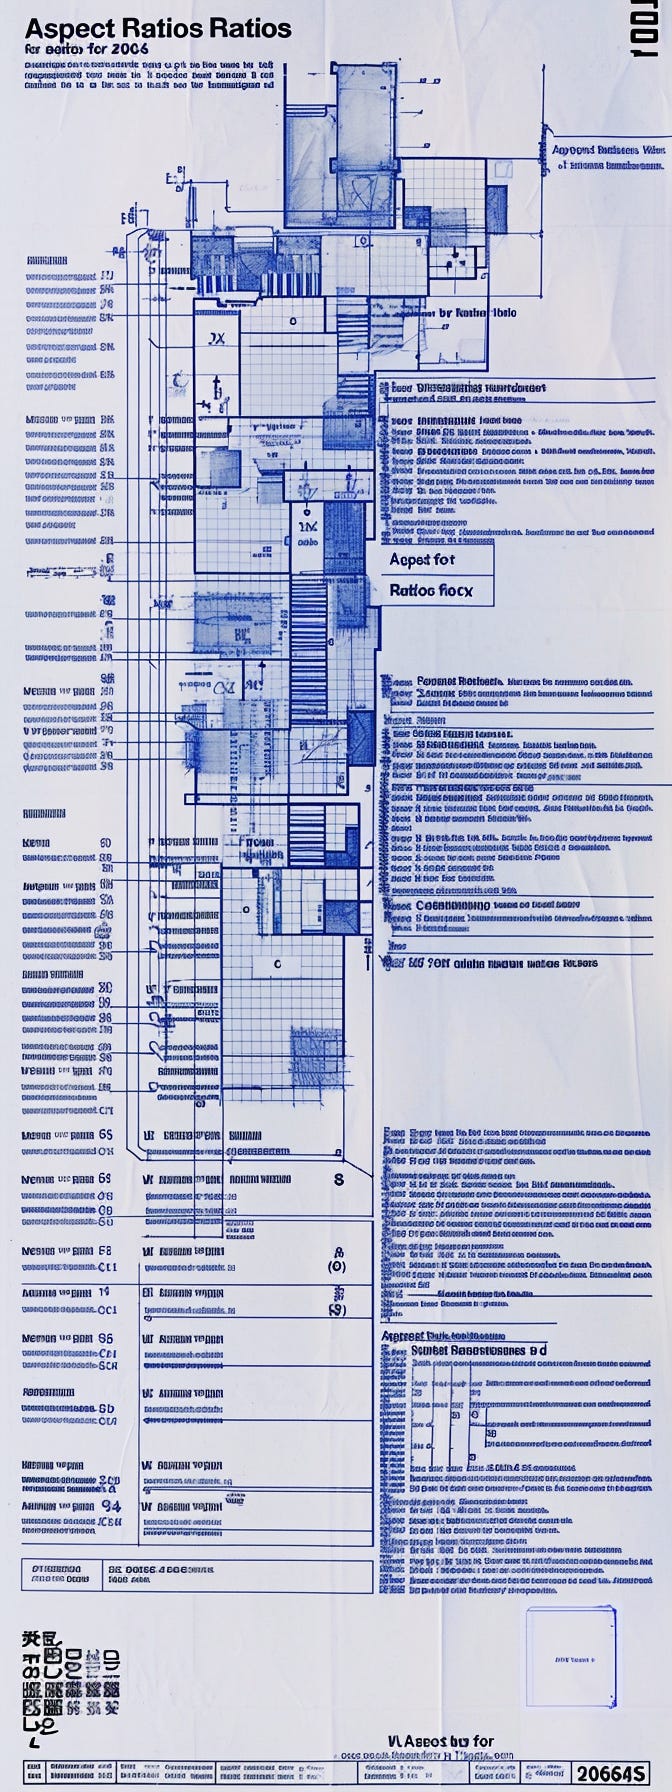 paulhenrysmith_an_orderly_paper_engineering_diagram_in_blue_ink_d8027312-c1f3-46b9-9244-6b91a372d8c9.png